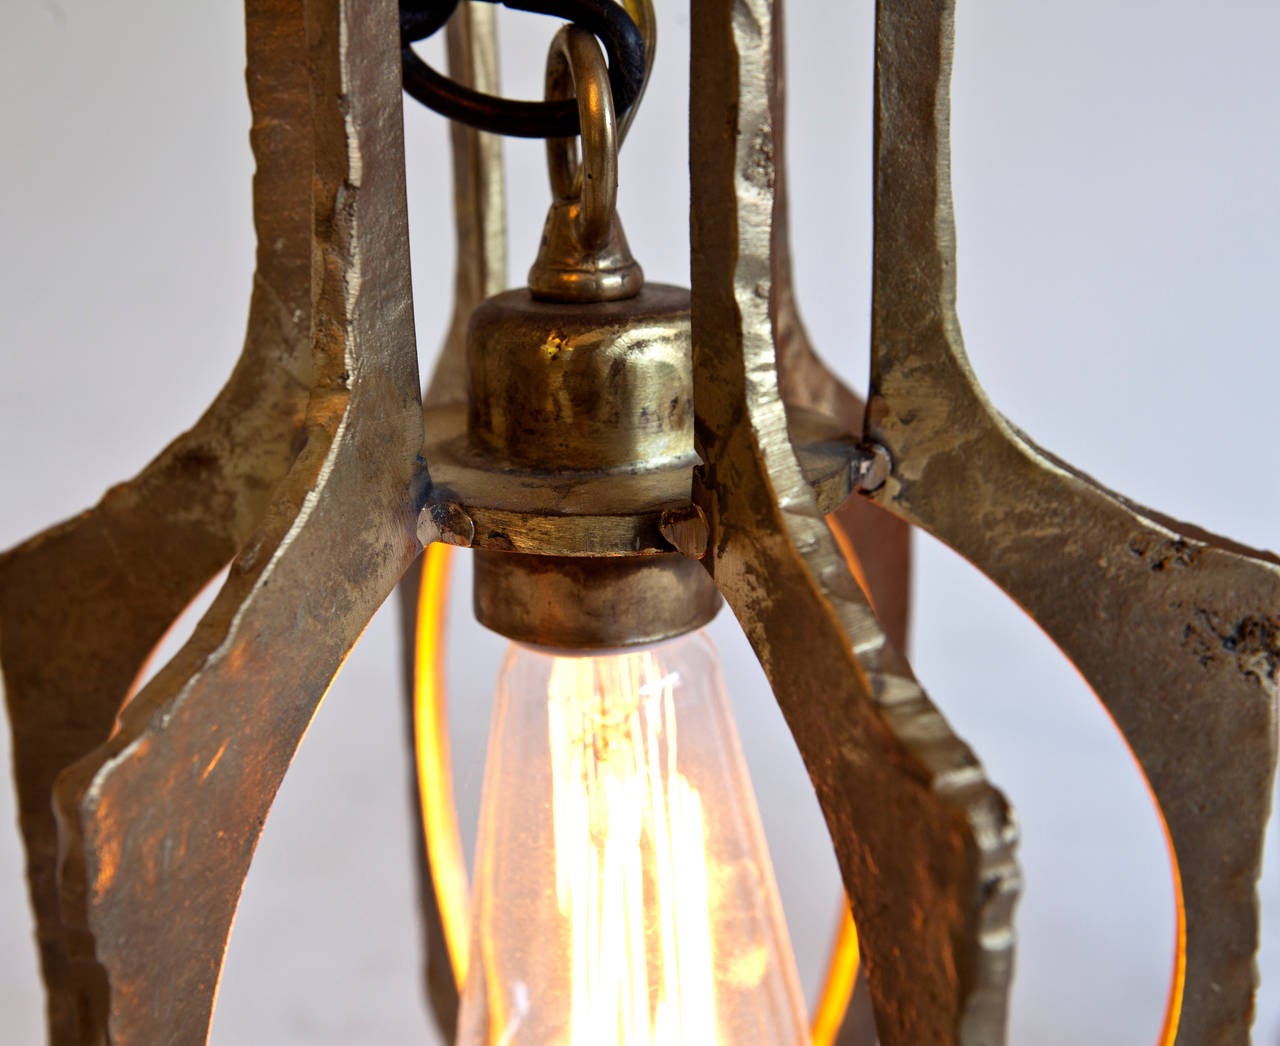 Foundry cast, solid brass pendant light. Comes with 10' of steel chain, 60 Watt Edison style bulb, and canopy. UL listed. Designed and manufactured in Los Angeles. Additional chain available upon request.

James de Wulf has been widely recognized